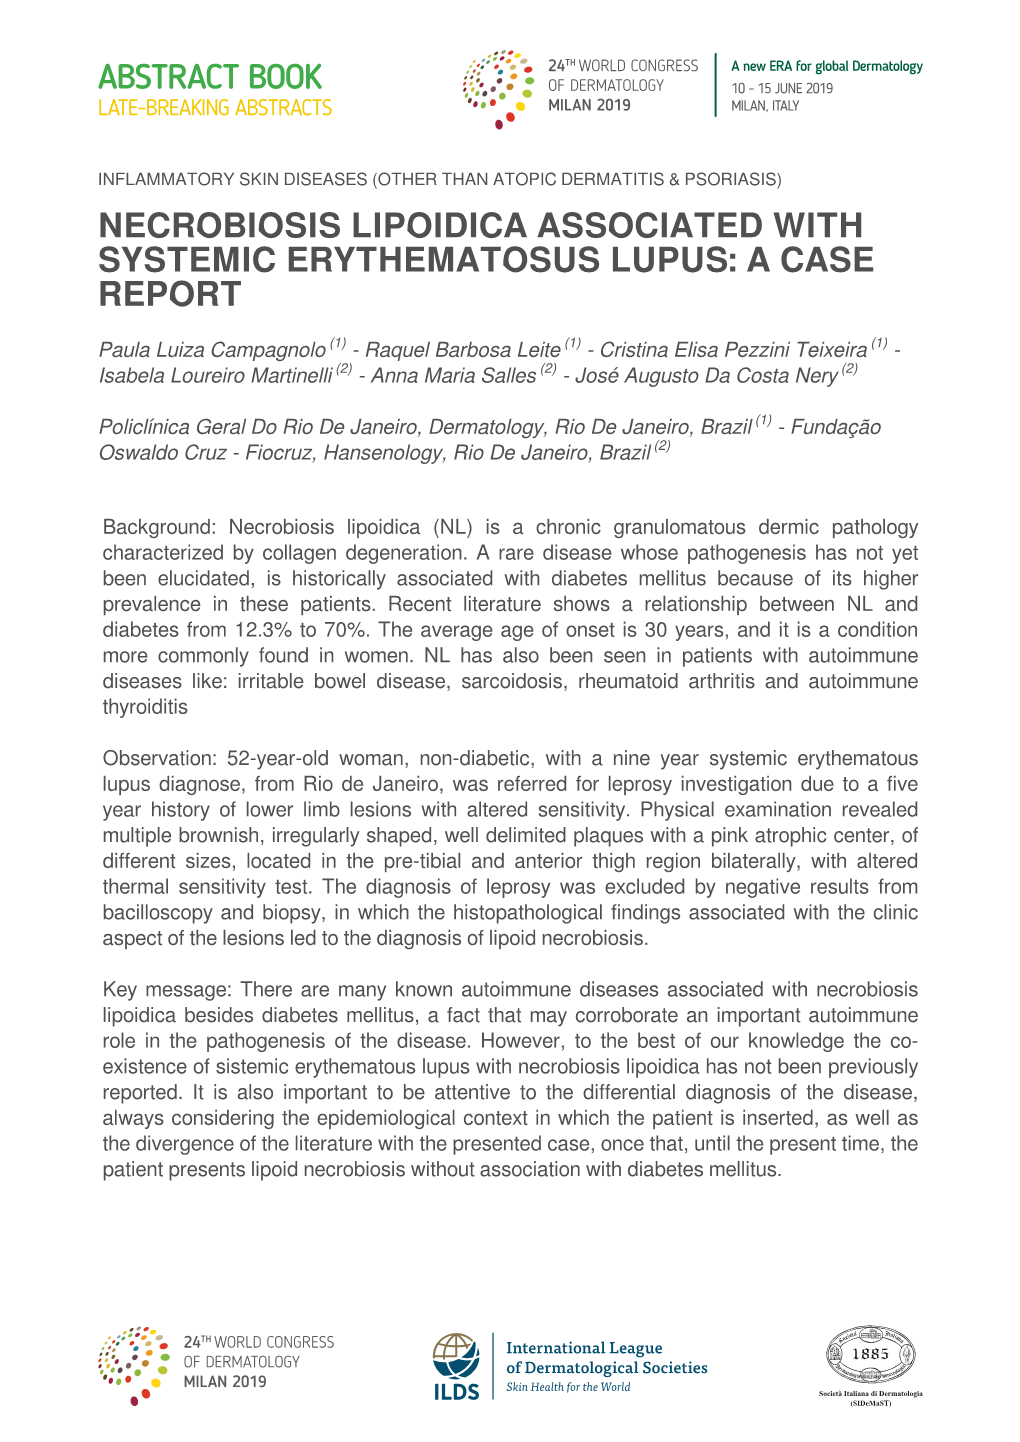 Necrobiosis Lipoidica Associated with Systemic Erythematosus Lupus: a Case Report